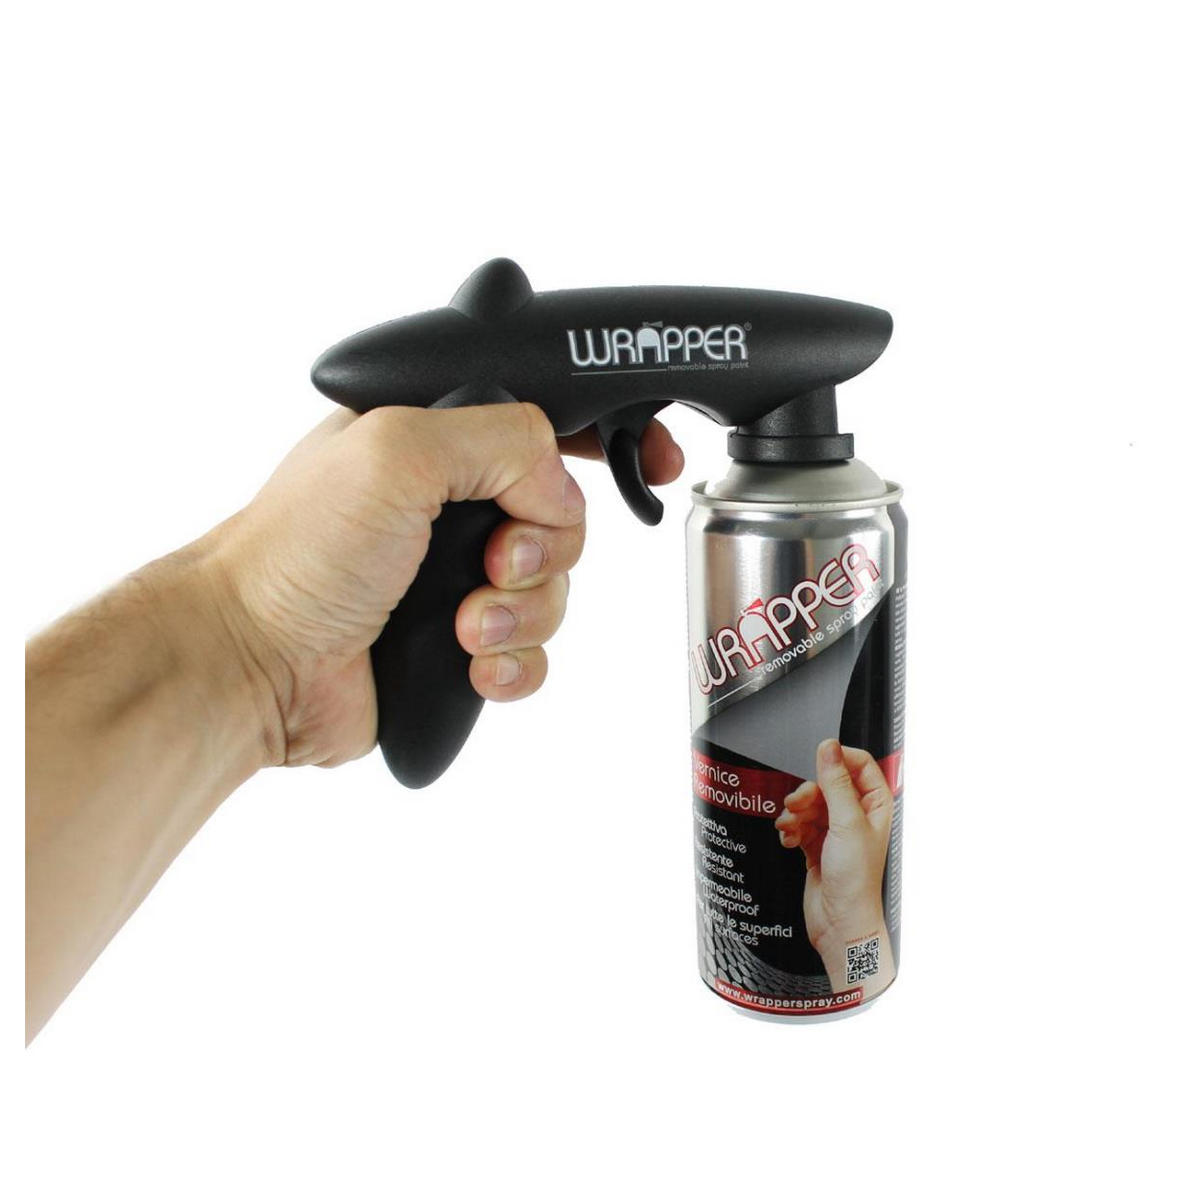 spray can tool with gun trigger for spray paint wrapper